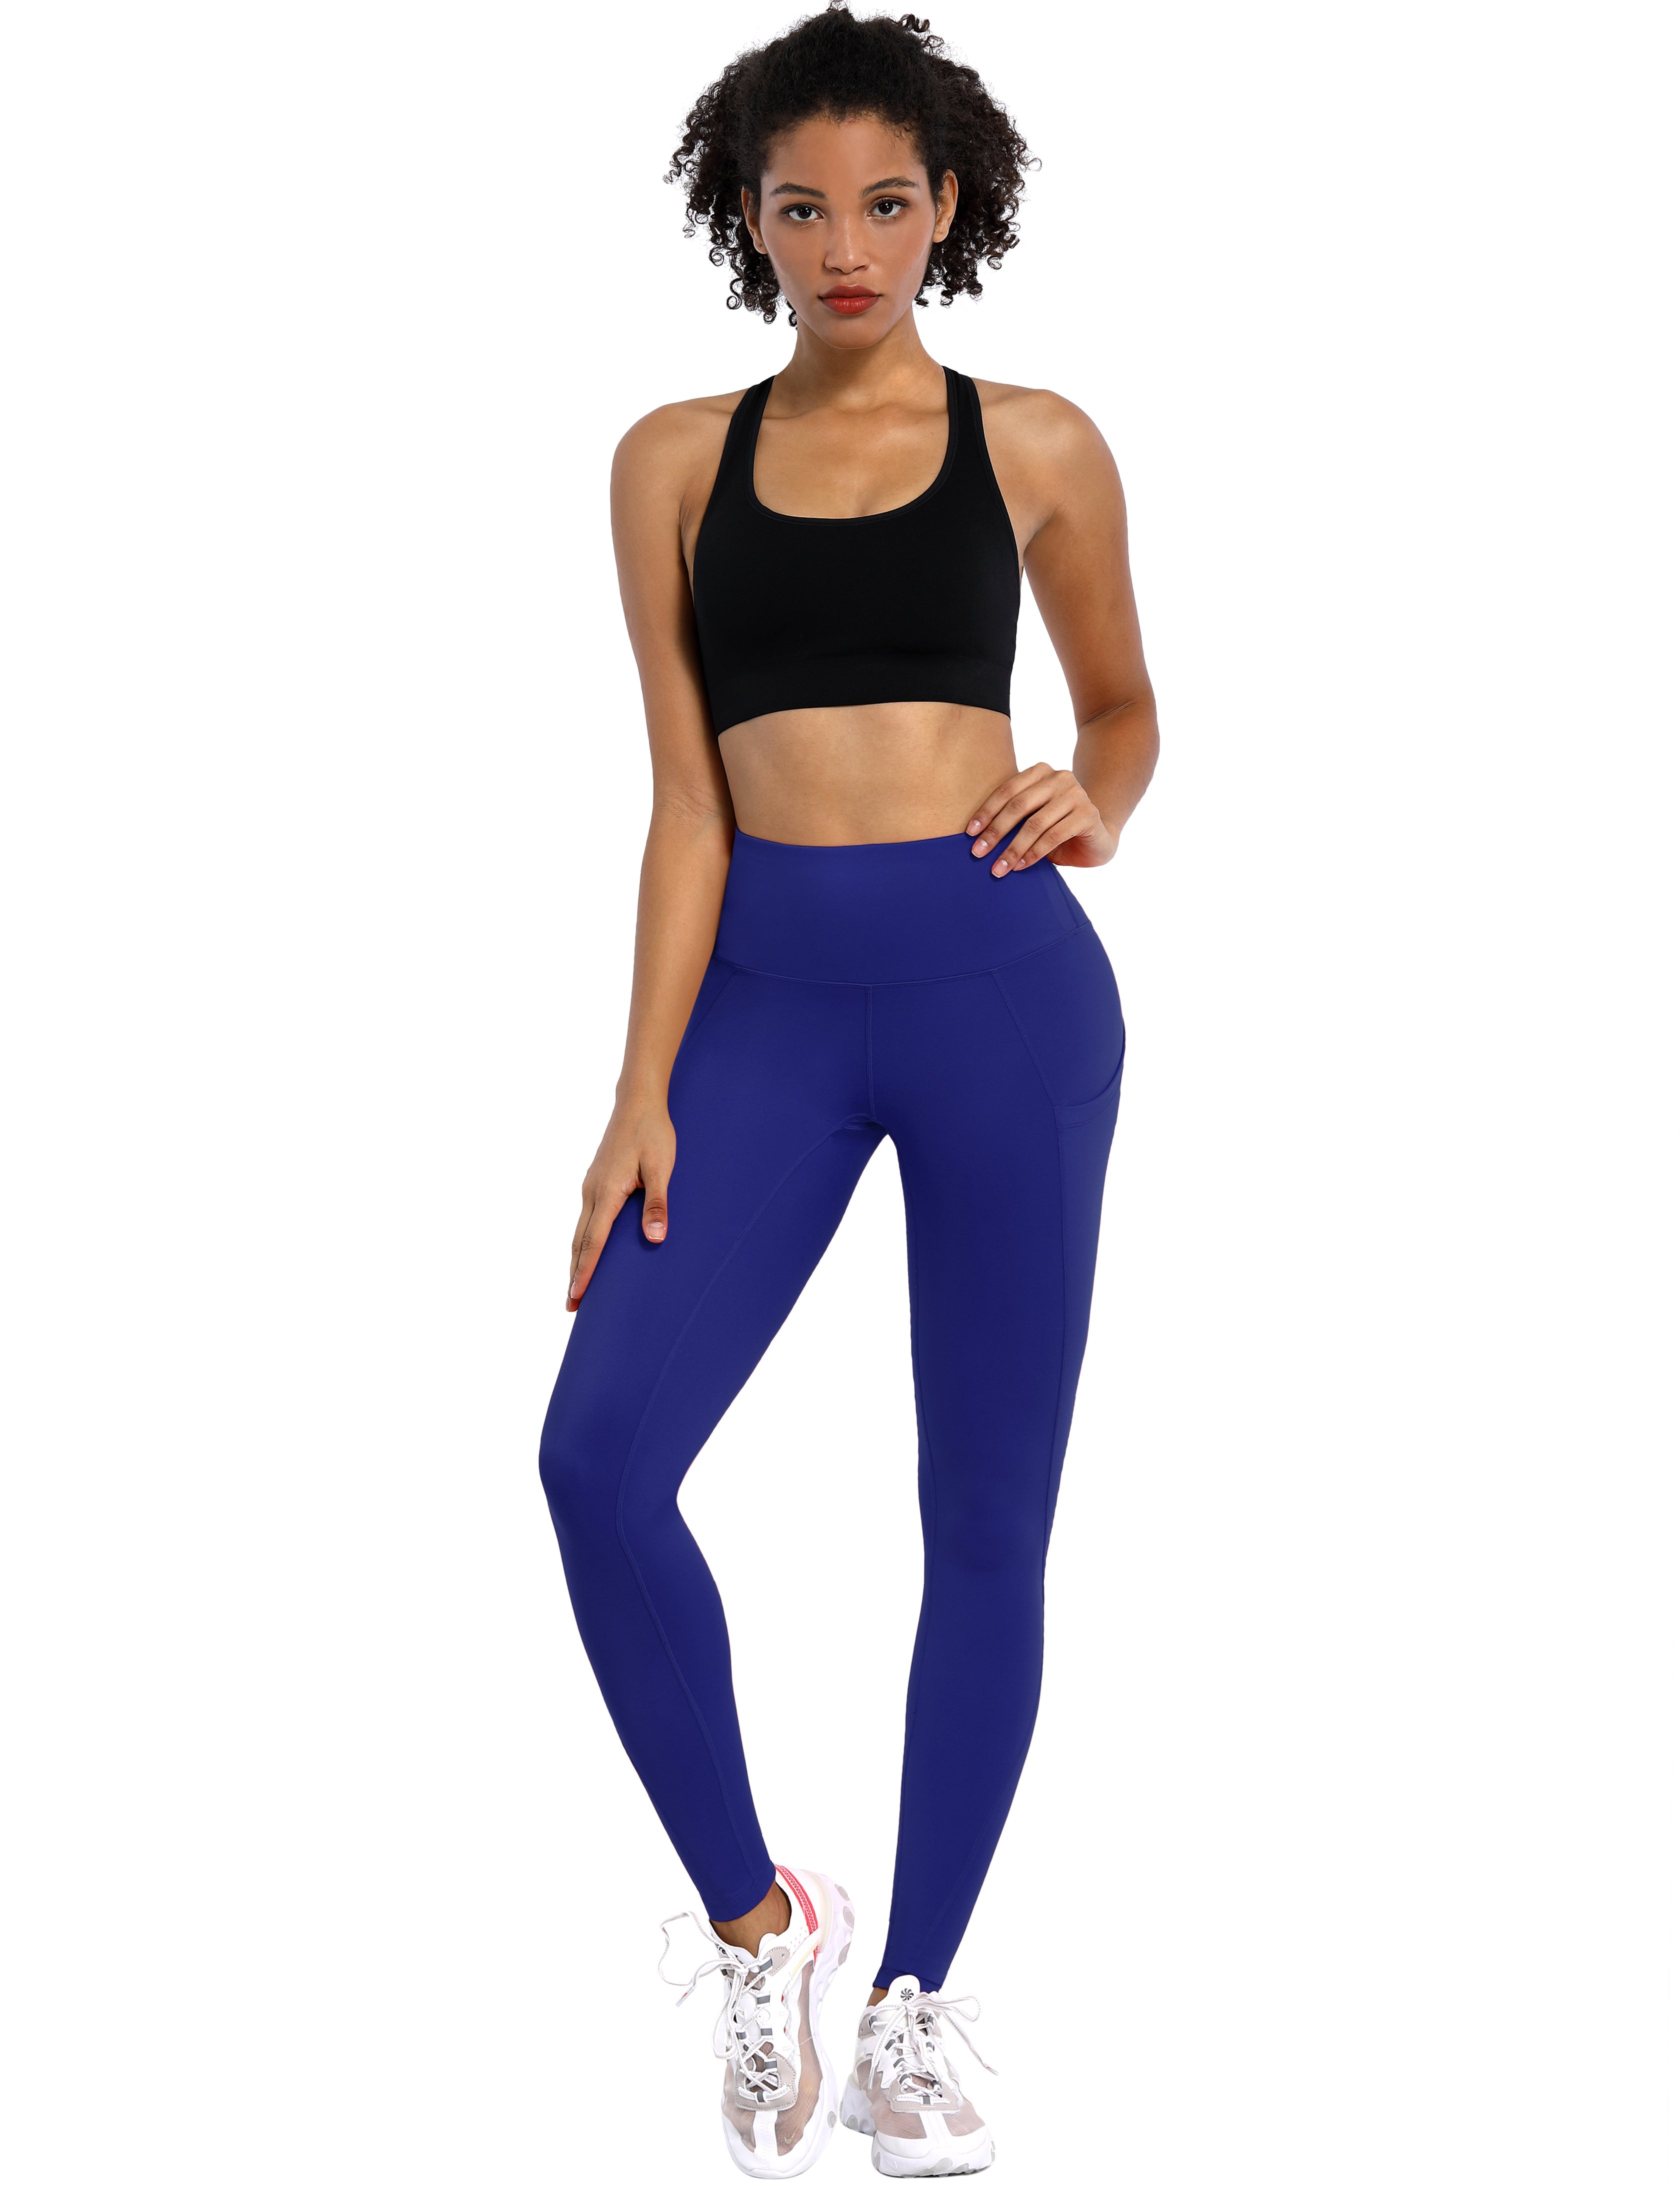 High Waist Side Pockets Biking Pants navy 75% Nylon, 25% Spandex Fabric doesn't attract lint easily 4-way stretch No see-through Moisture-wicking Tummy control Inner pocket